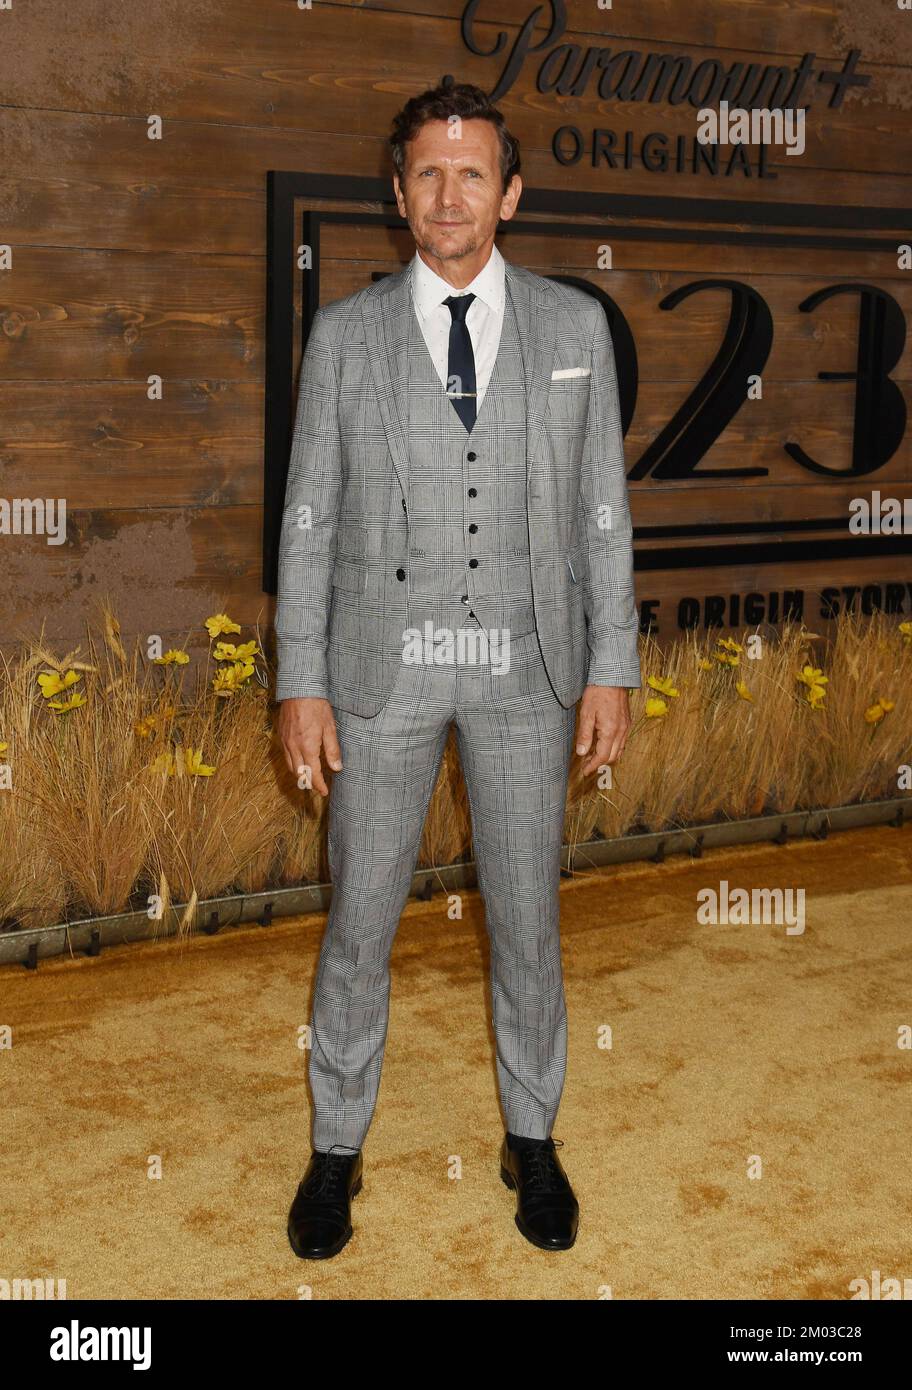 LOS ANGELES, CALIFORNIA - DECEMBER 02: Sebastian Roche attends the Los Angeles Premiere Of Paramount+'s '1923' at Hollywood American Legion on Decembe Stock Photo